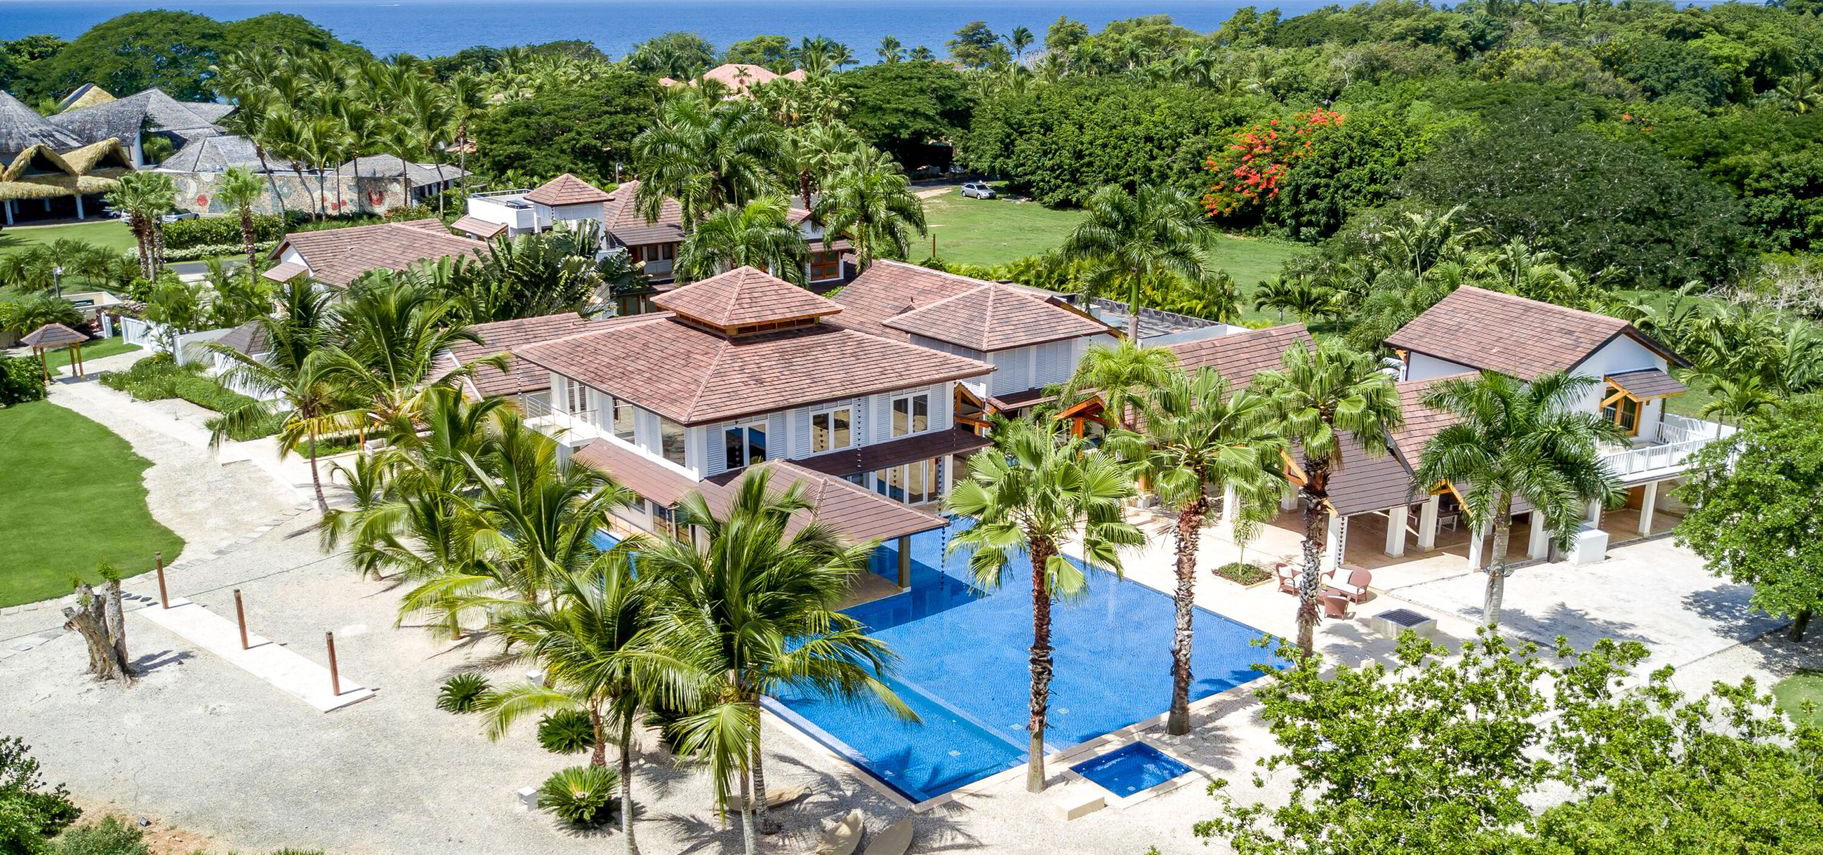 #0 Stylish Tropical Living in this Ocean View Luxury Home